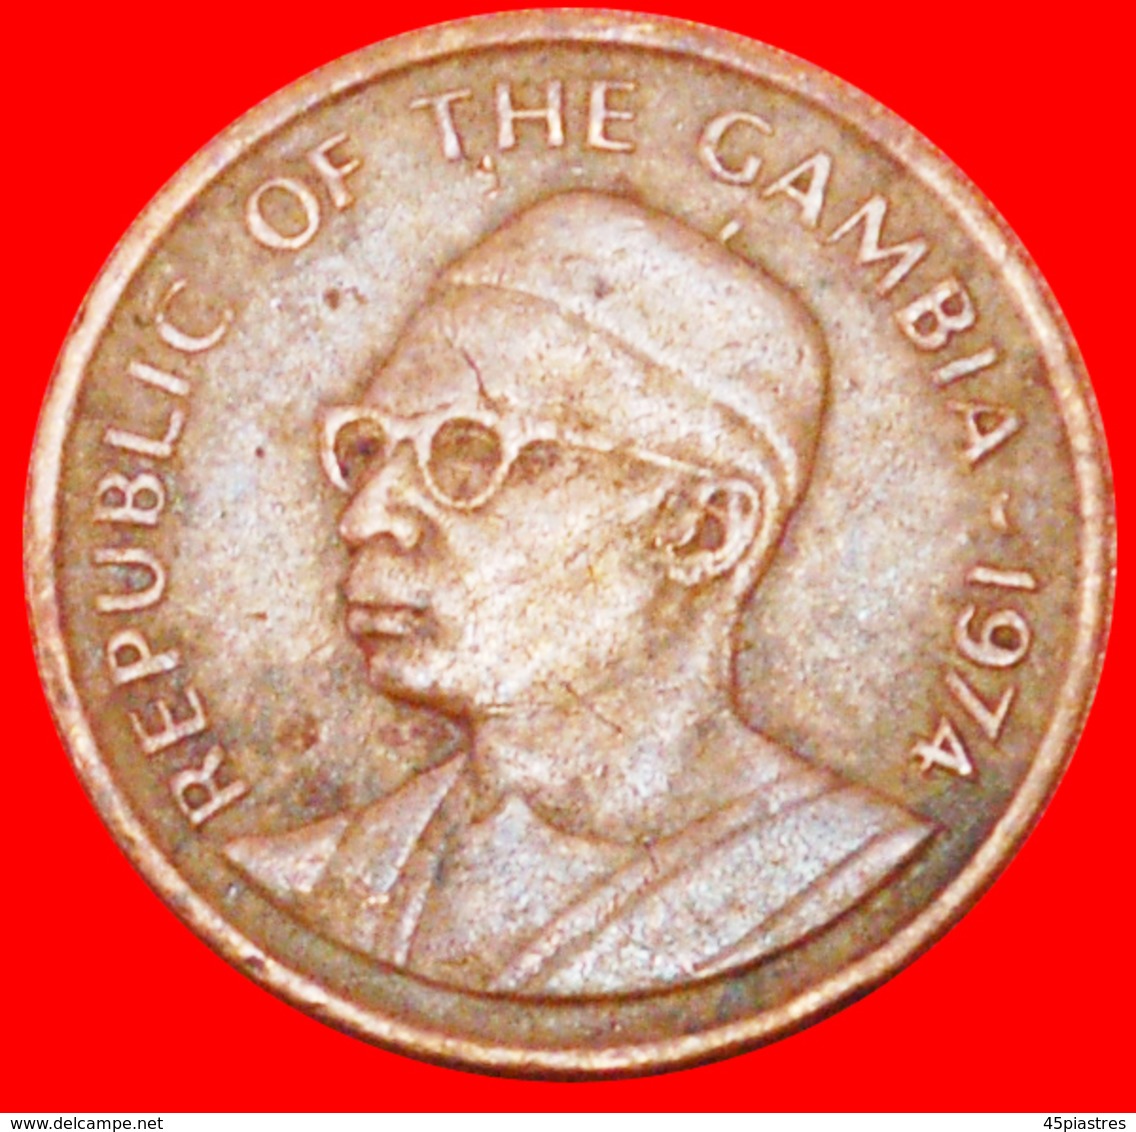 # PEANUTS: THE GAMBIA ★ 1 BUTUT 1974! LOW START ★ NO RESERVE! - Gambia